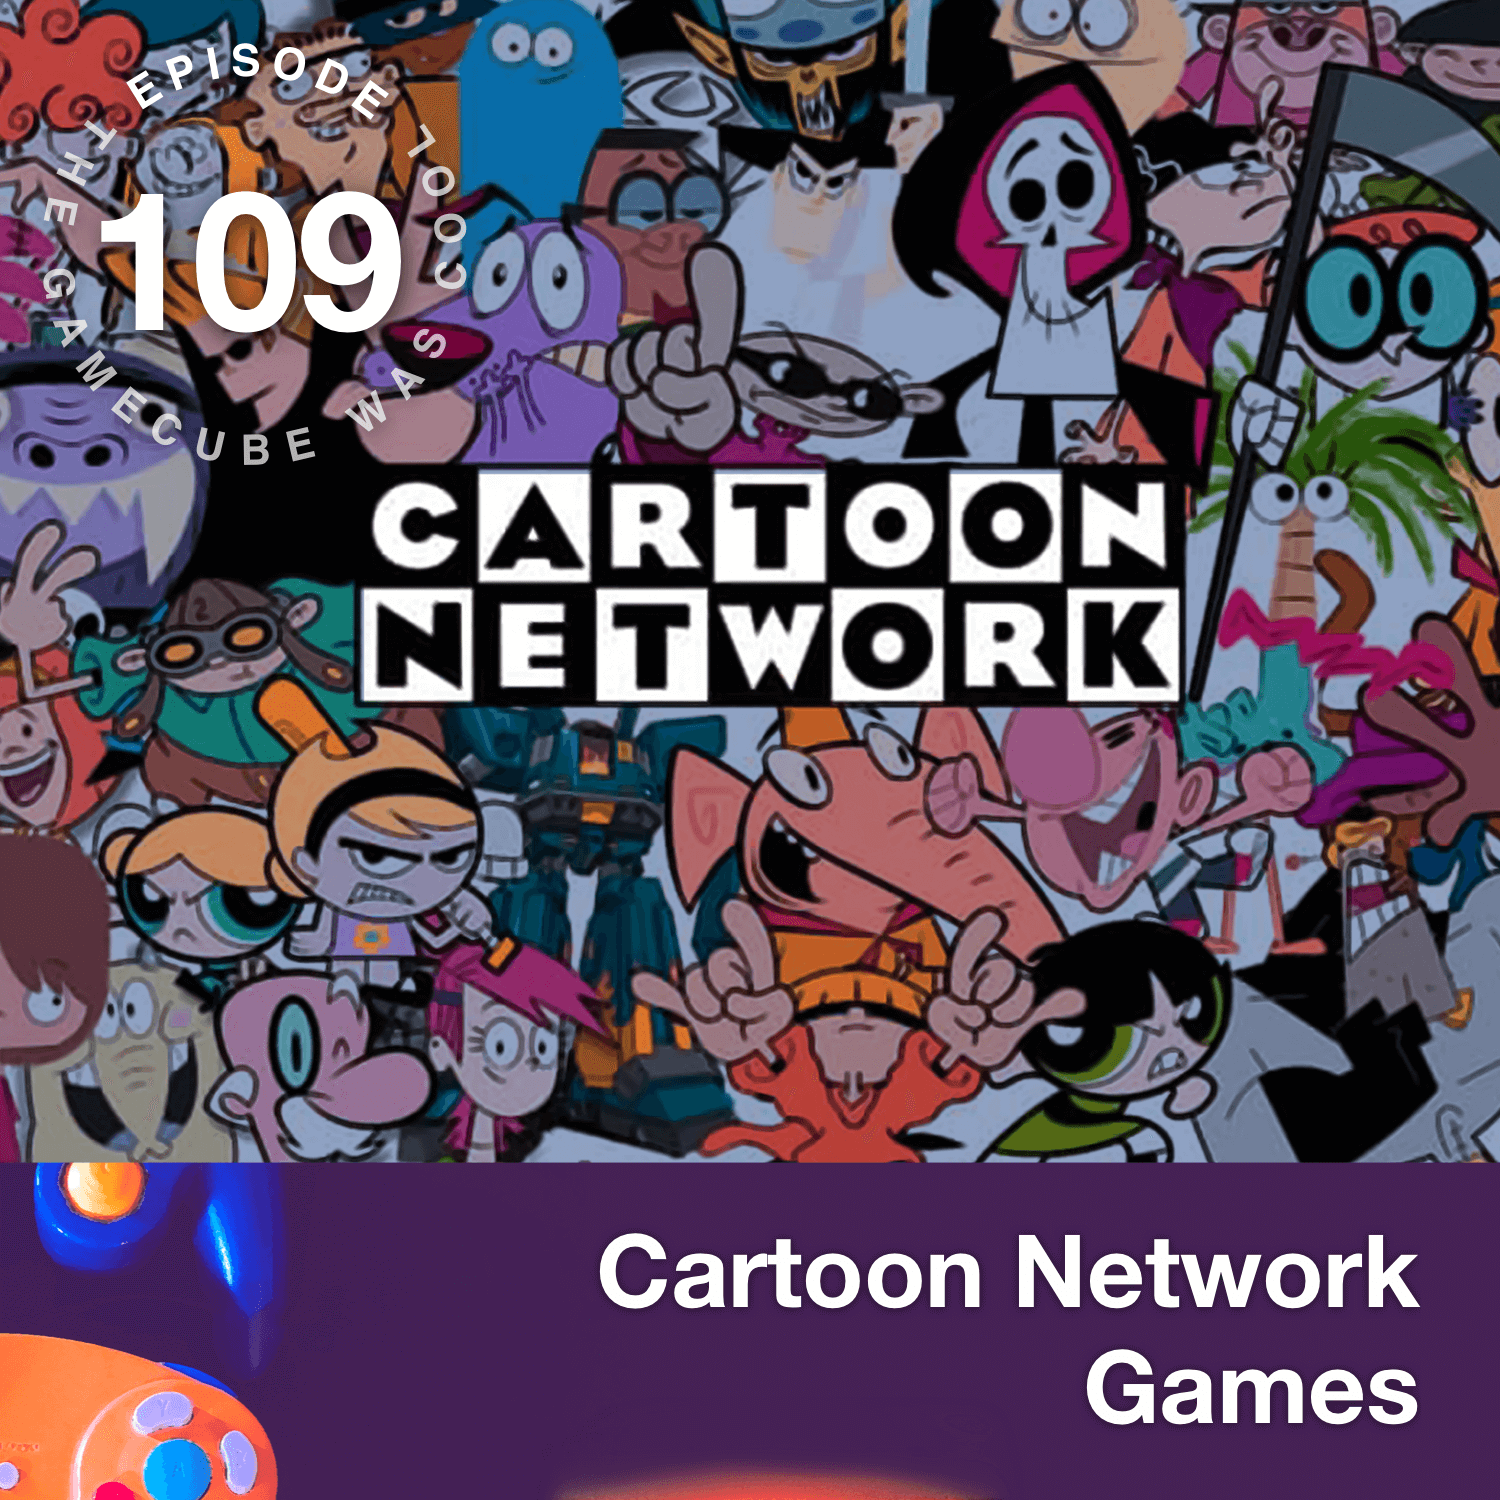 Cartoon Network Games for The GameCube